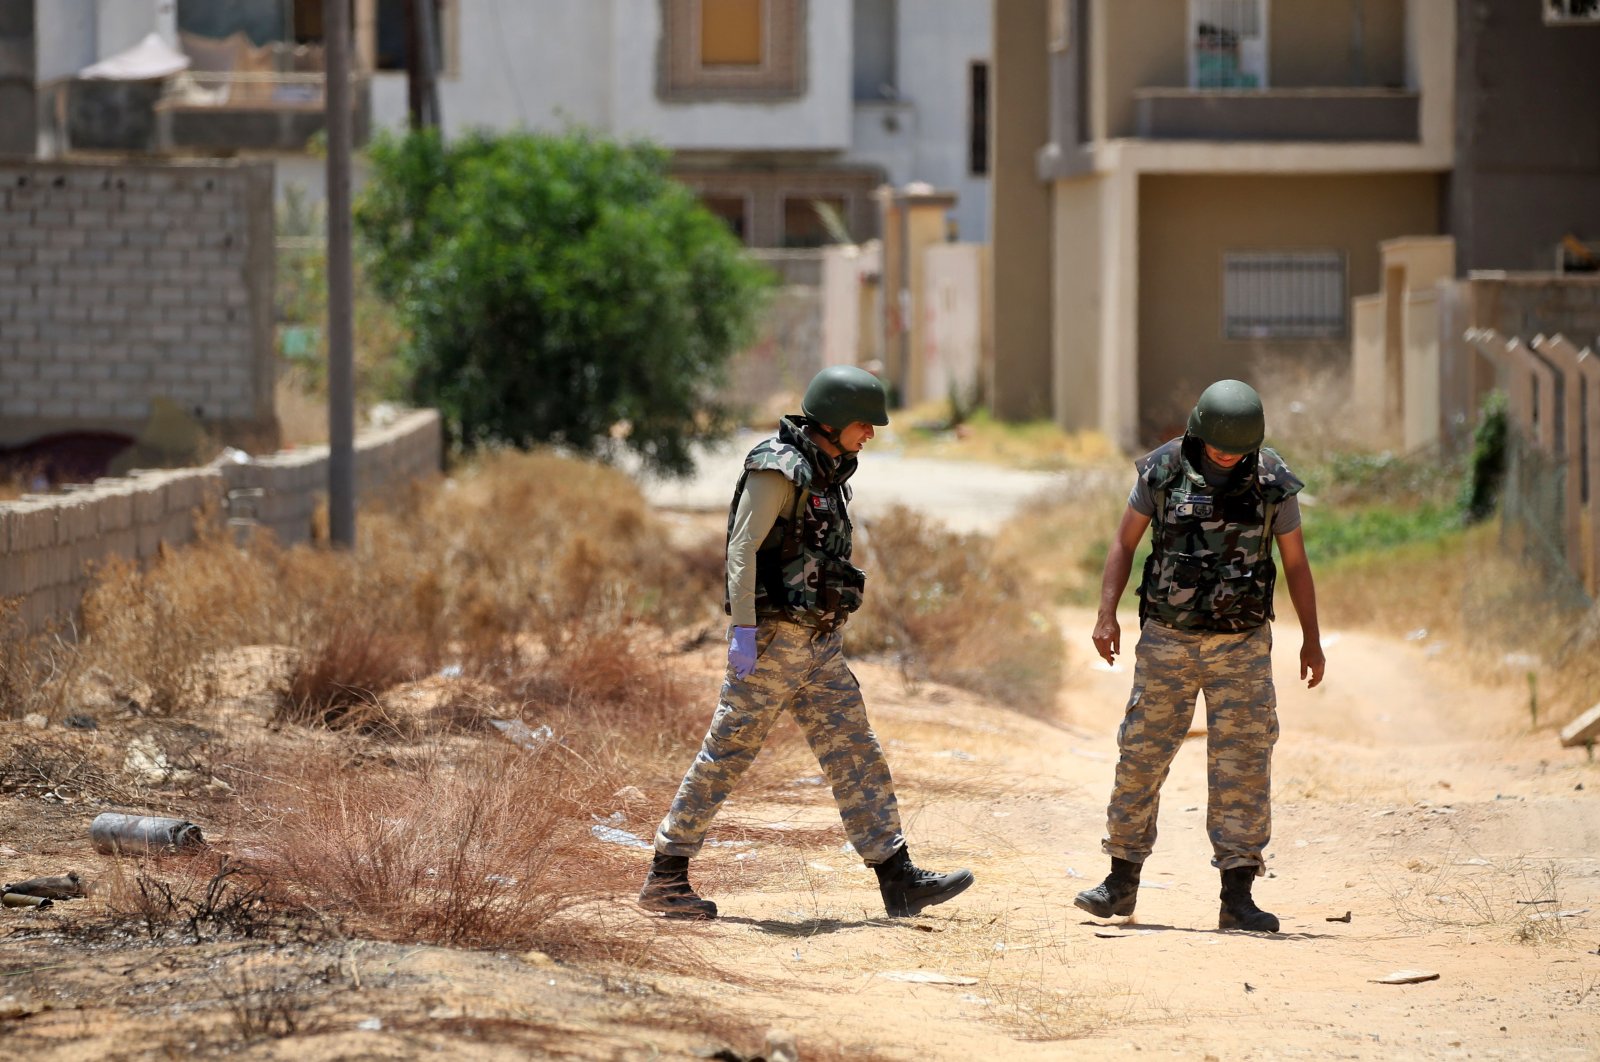 Turkish de-miners search and clear landmines in the area of Salah al-Din, south of the Libyan capital Tripoli, June 15, 2020. (AFP Photo)